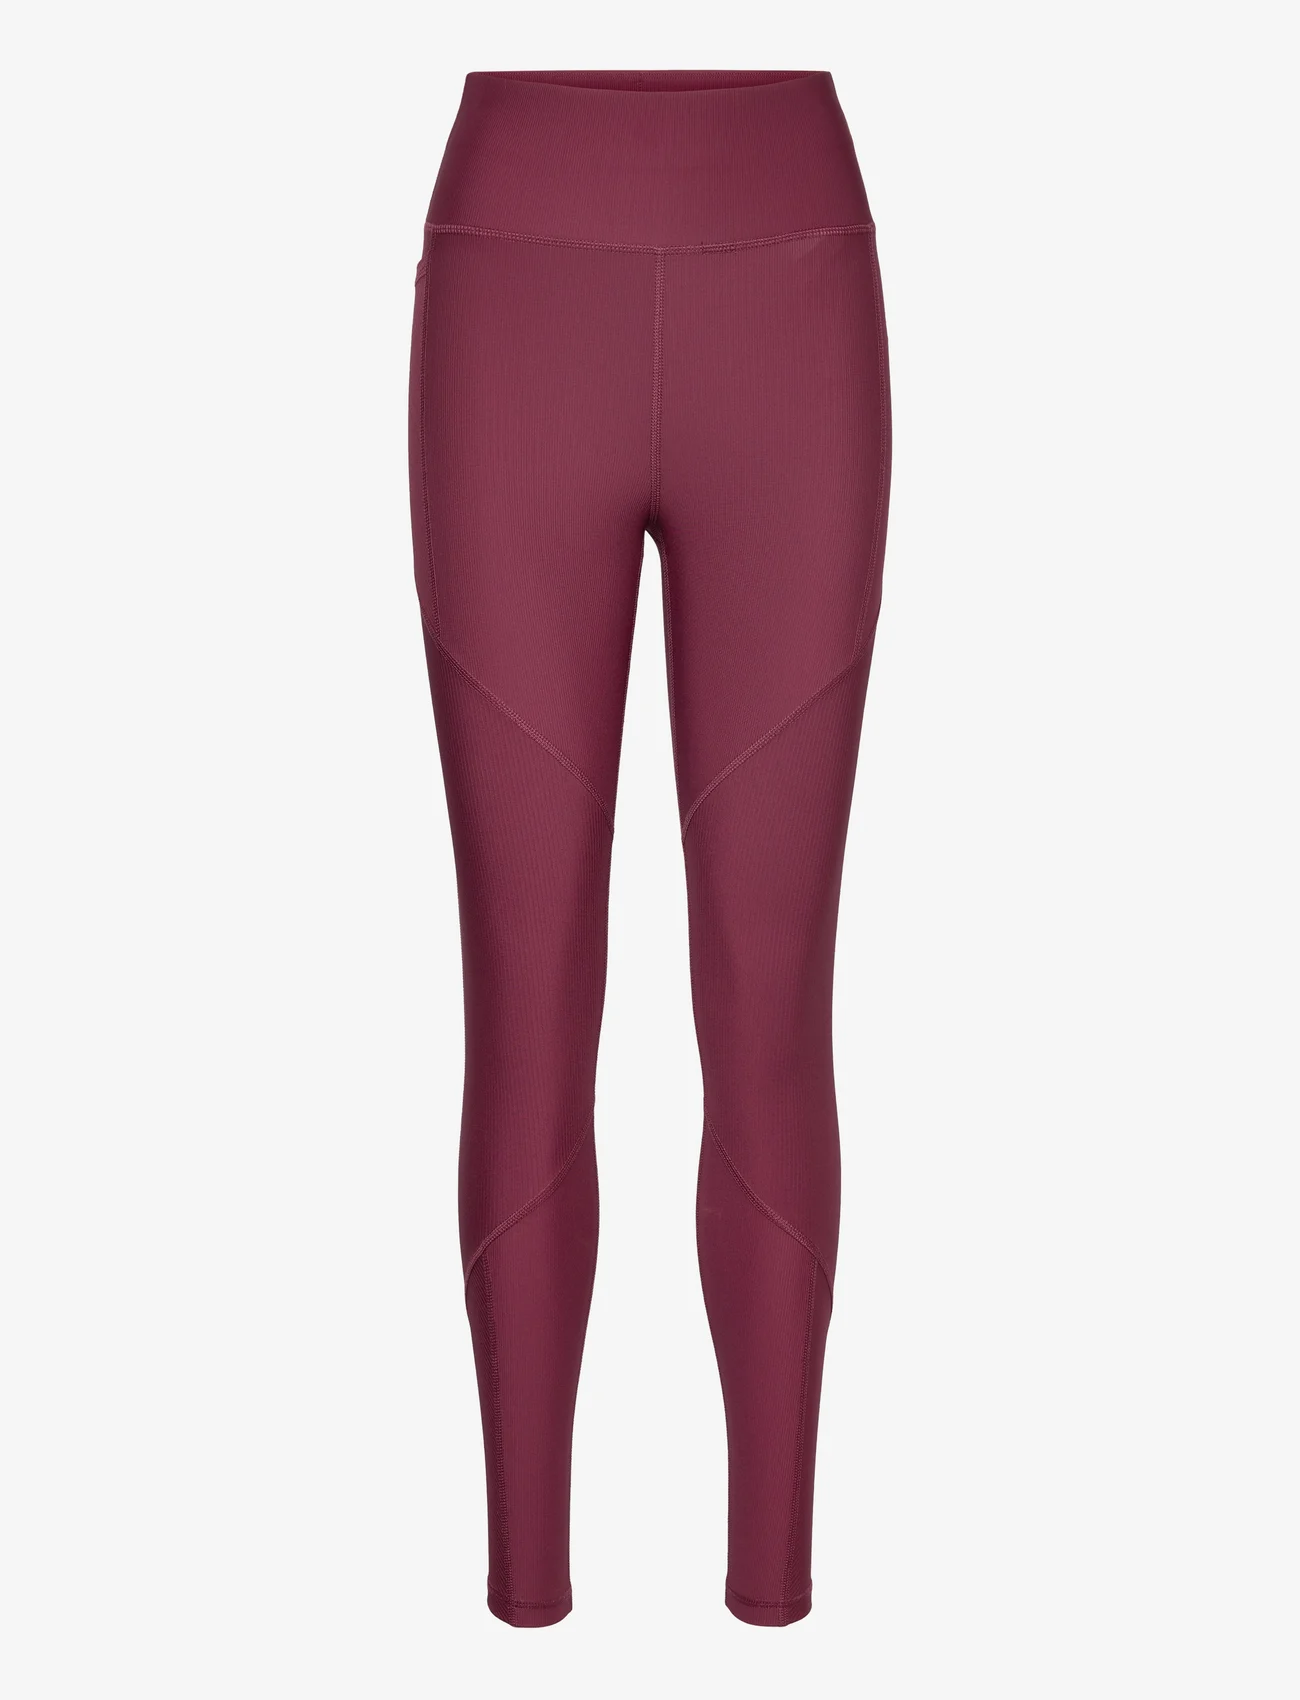 Only Play - ONPJANA-2 HW PCK TIGHTS NOOS - running & training tights - windsor wine - 0